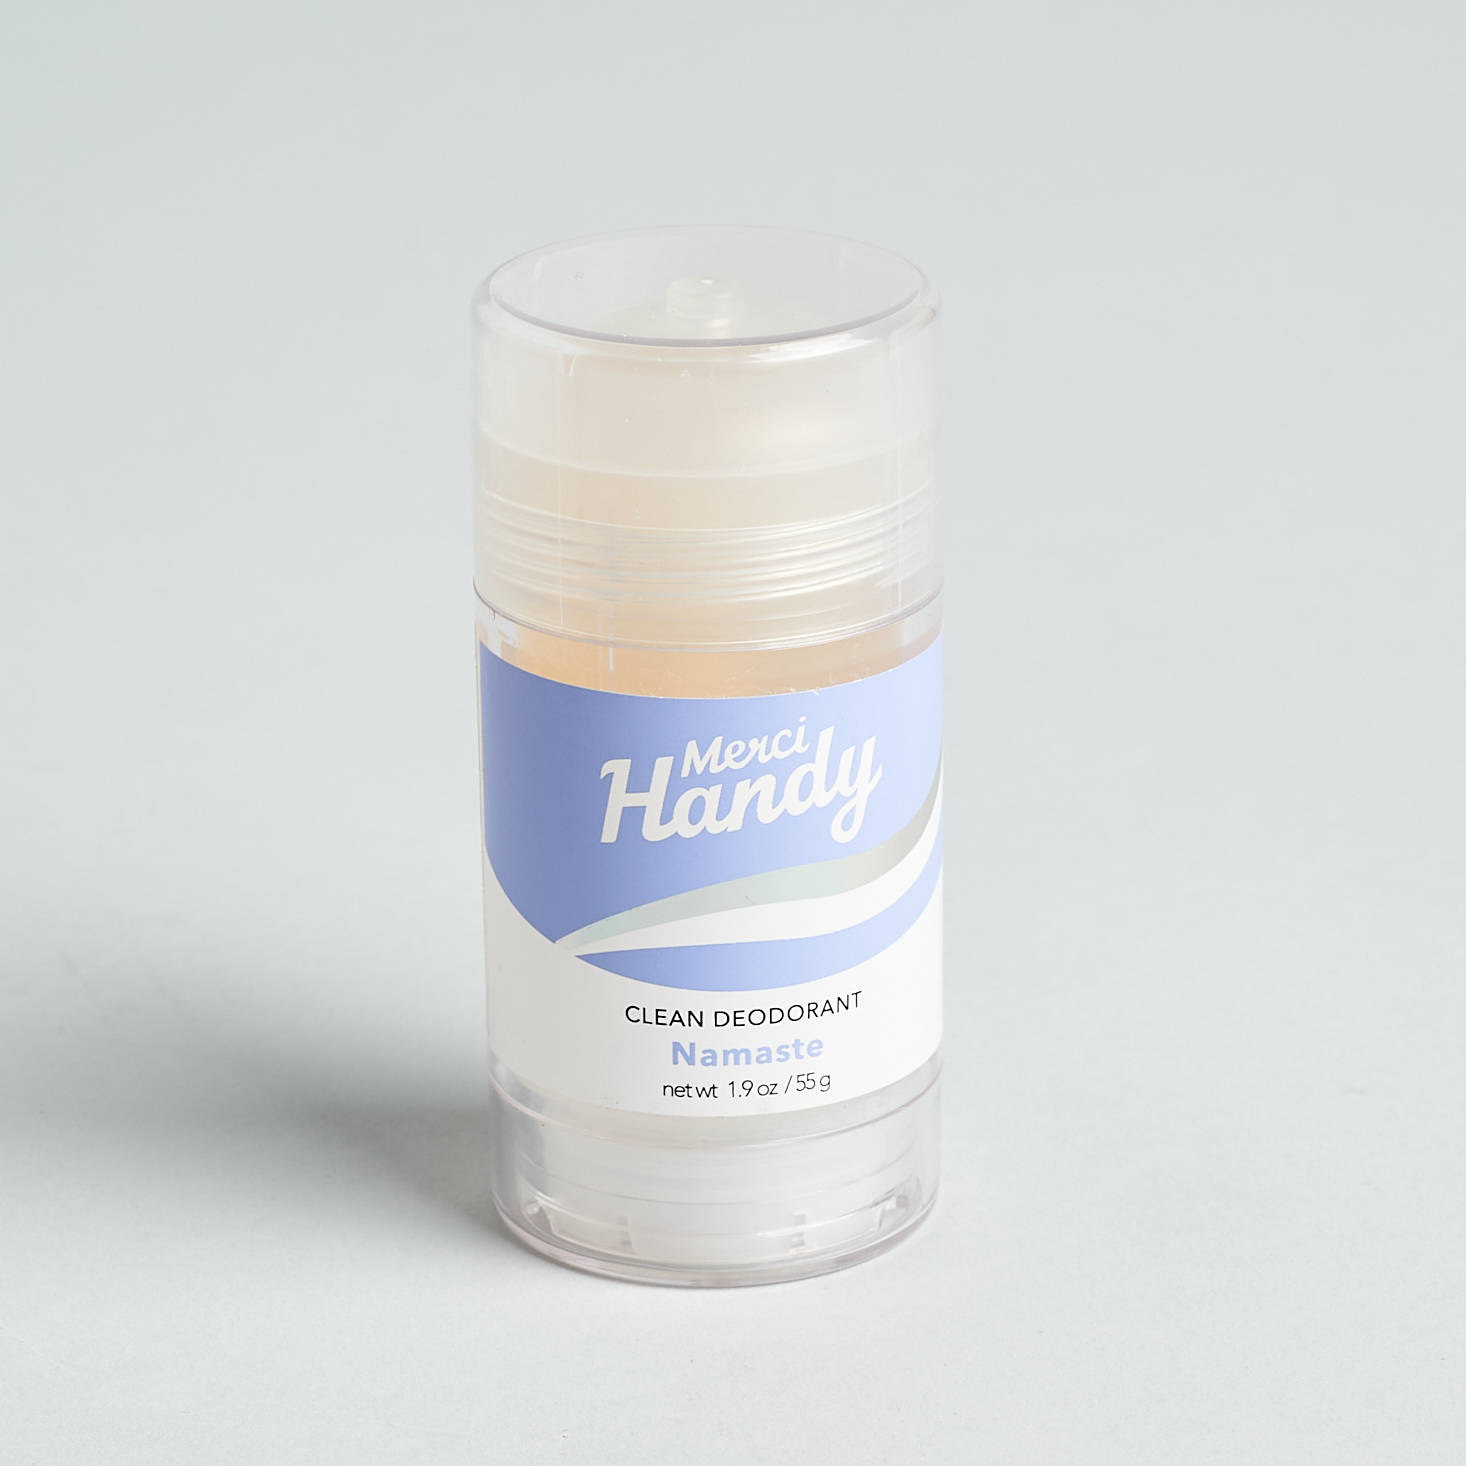 clear deodorant with lavender and white label